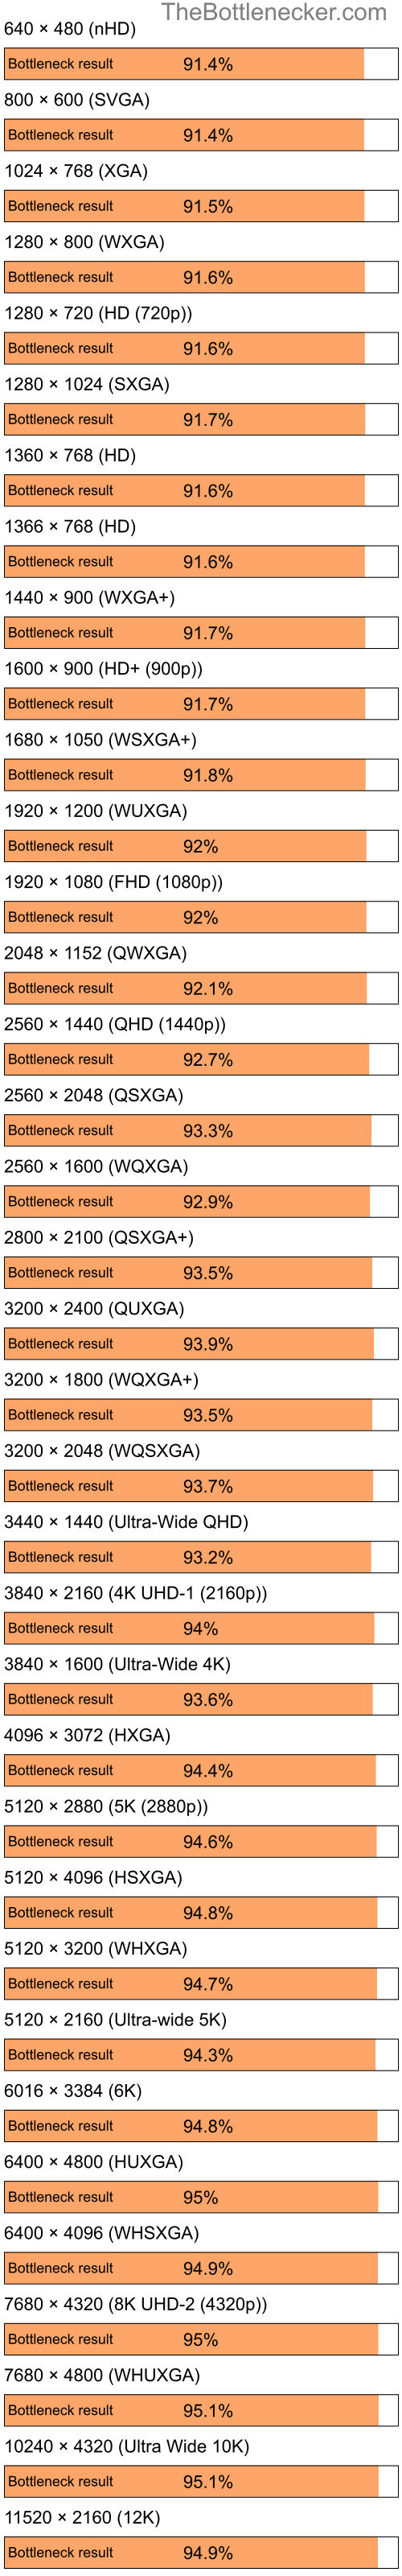 Bottleneck results by resolution for Intel Pentium 4 and AMD Mobility Radeon 9200 in General Tasks